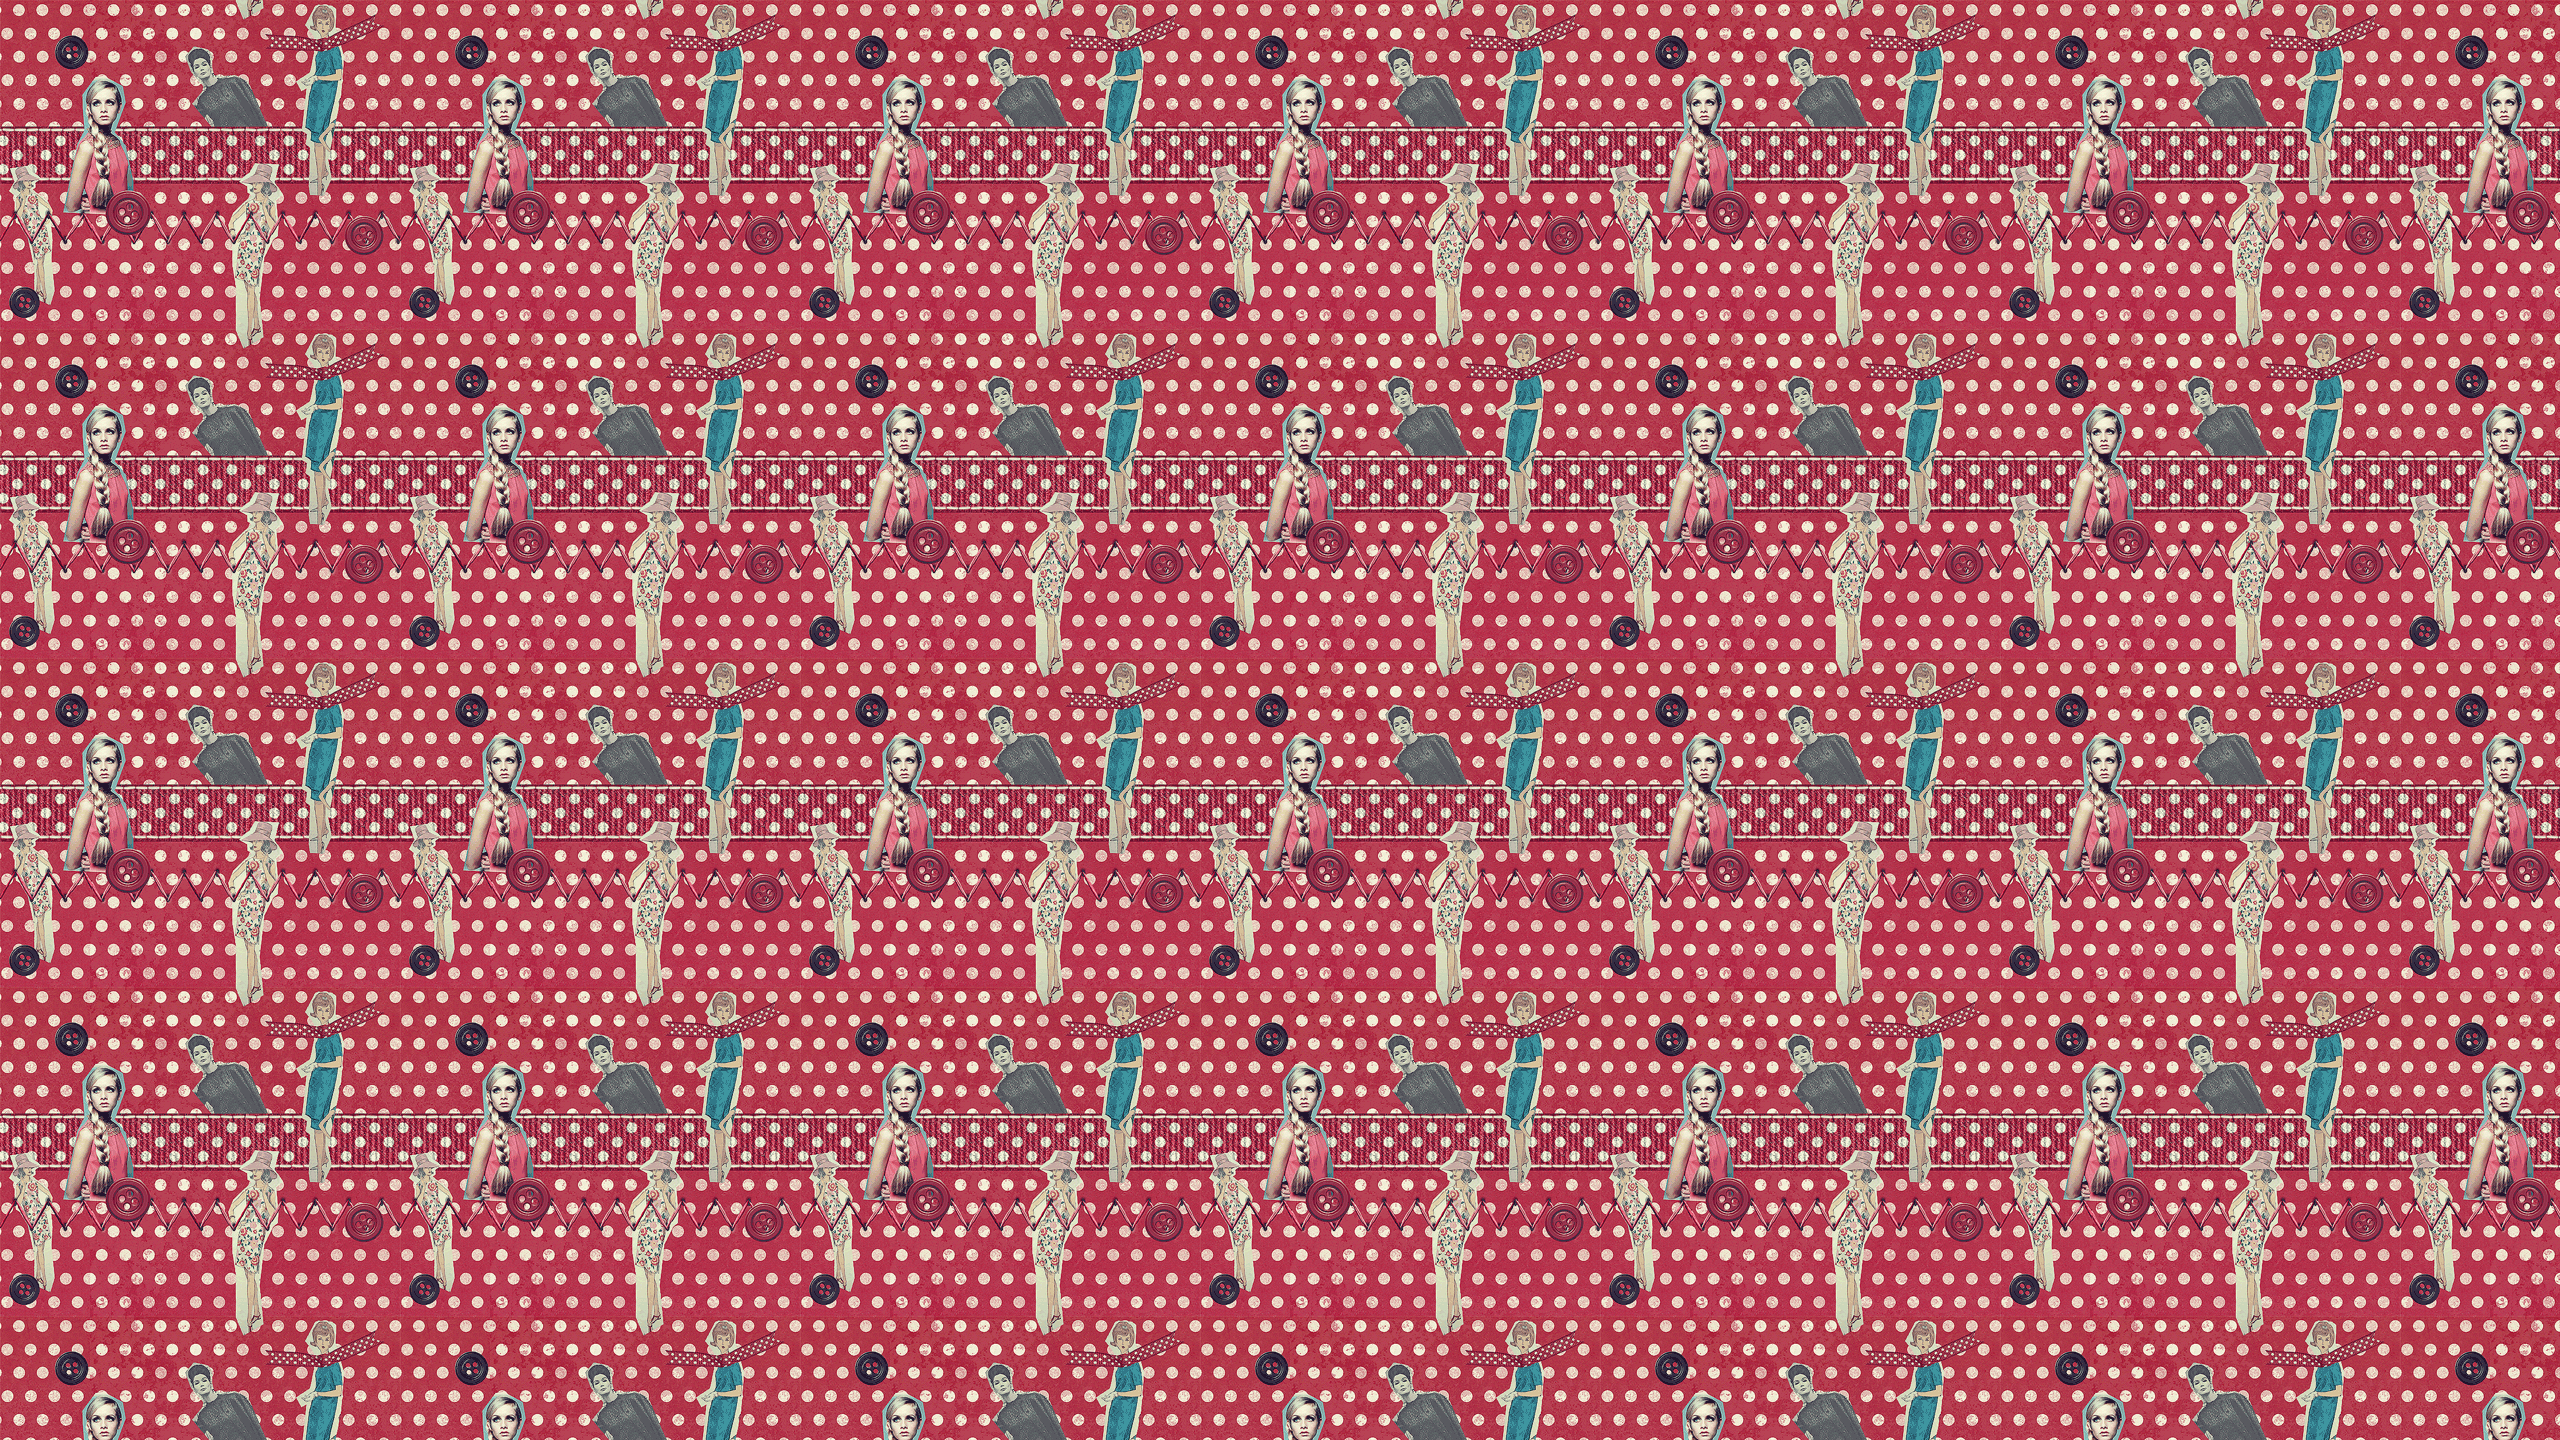 This Vintage Fabric Desktop Wallpaper Is Easy Just Save The